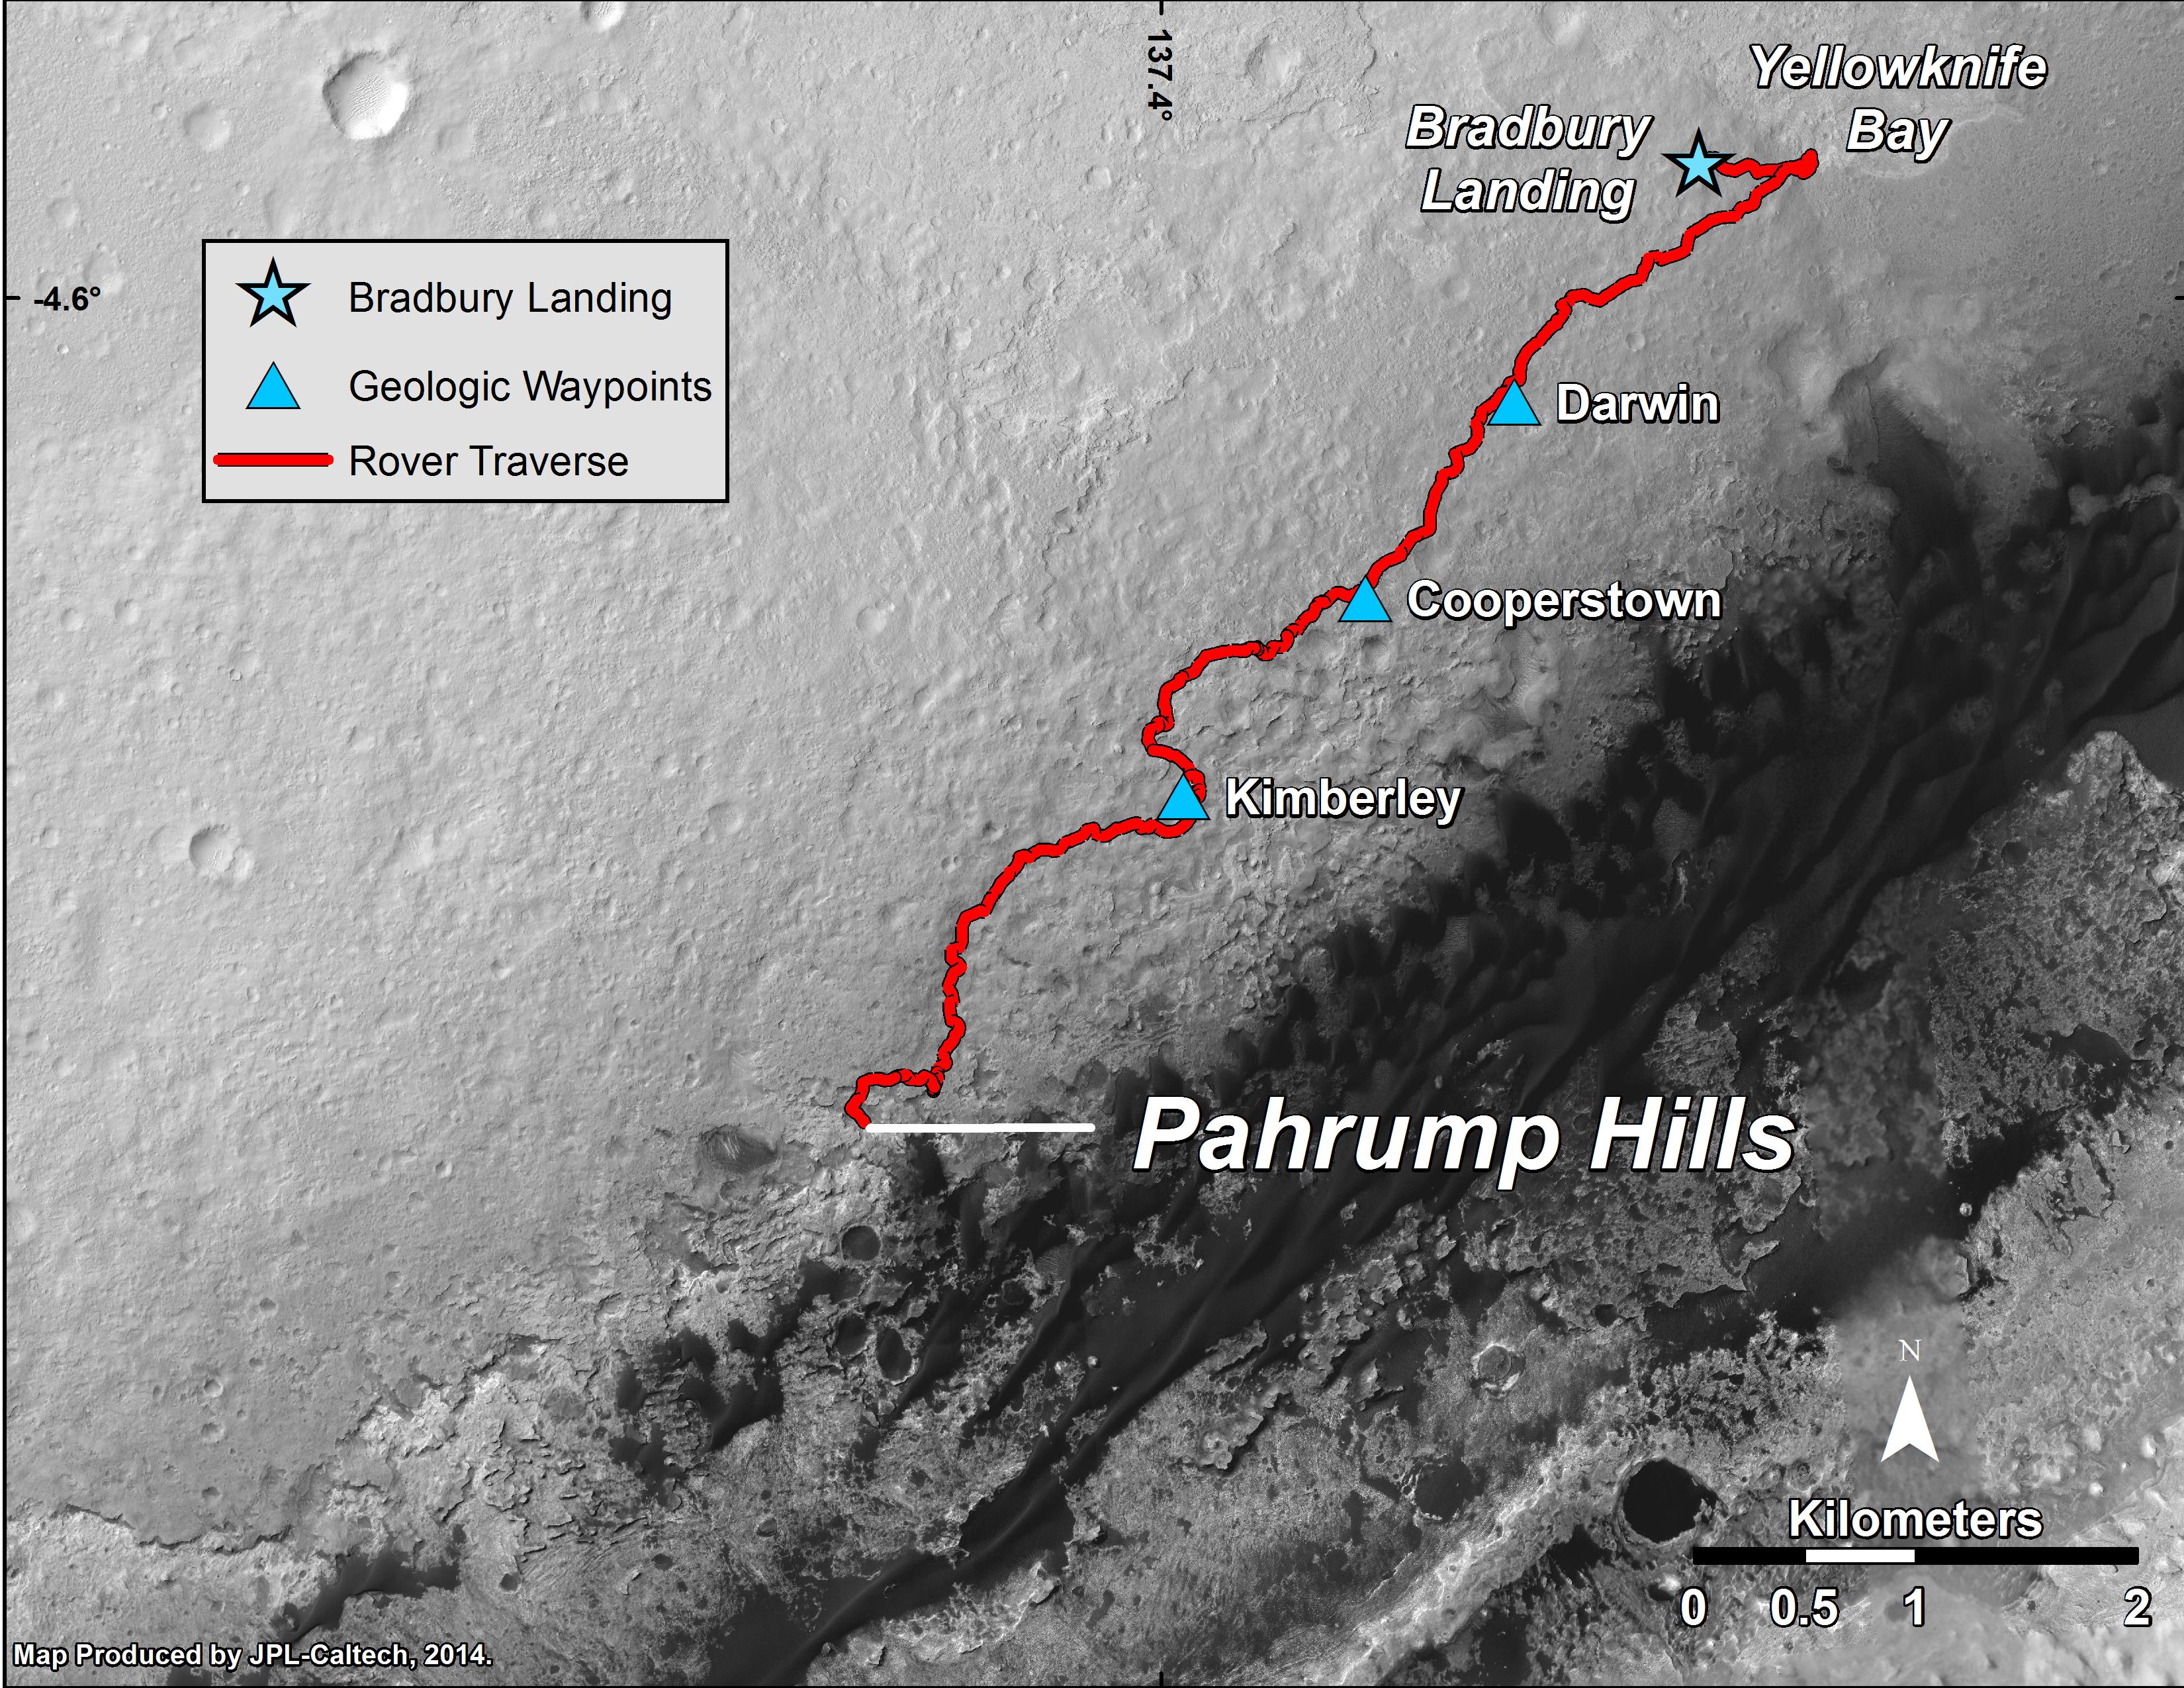 This map shows the route driven by NASA's Curiosity Mars rover from the "Bradbury Landing" location where it landed in August 2012 to the "Pahrump Hills" outcrop where it drilled into the lowest part of Mount Sharp.  Credit: NASA/JPL-Caltech/Univ. of Arizona  